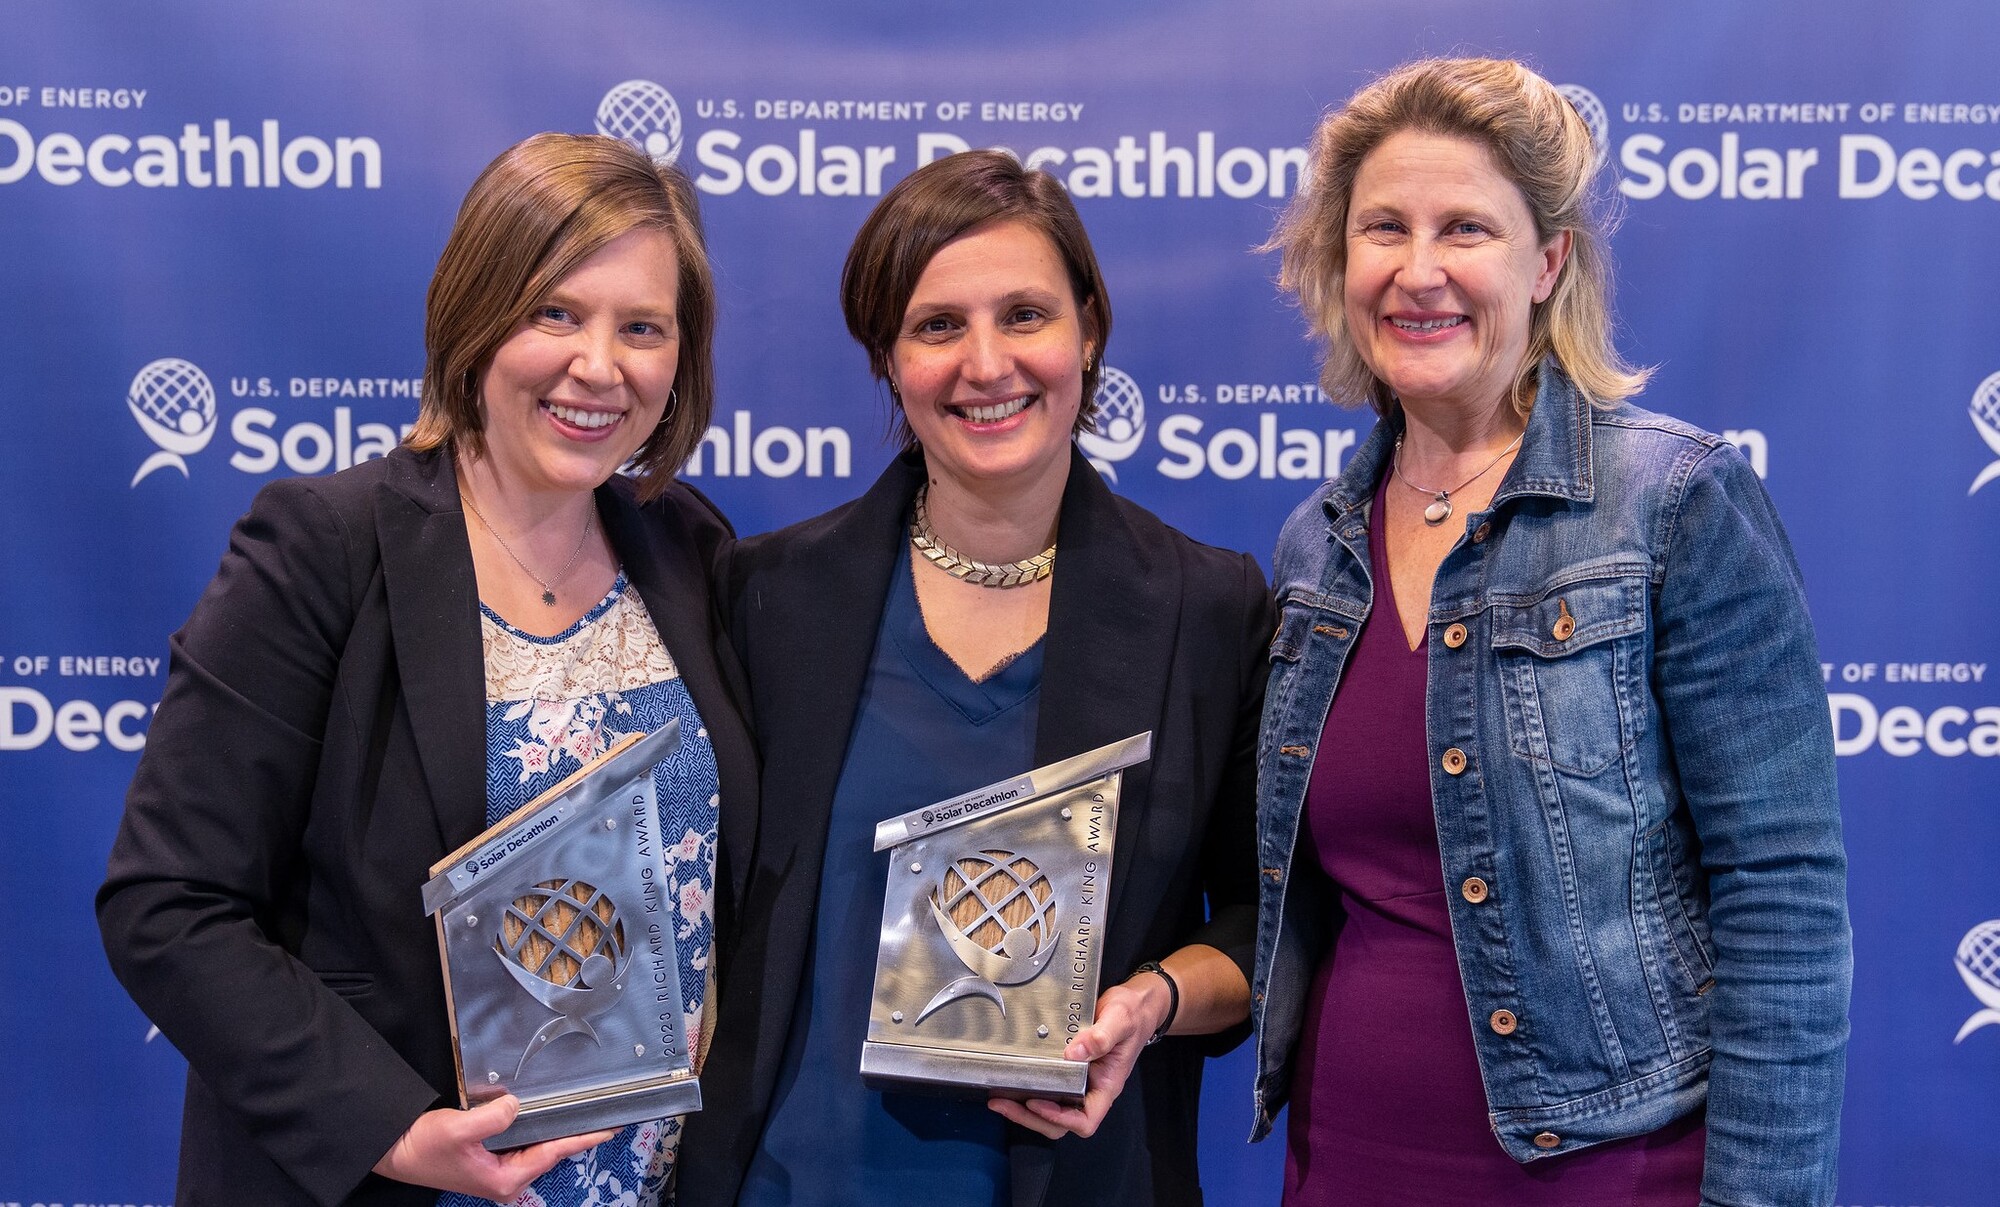 Three women smiling and looking at the camera, holding awards, against a backdrop with the Solar Decathlon logo.